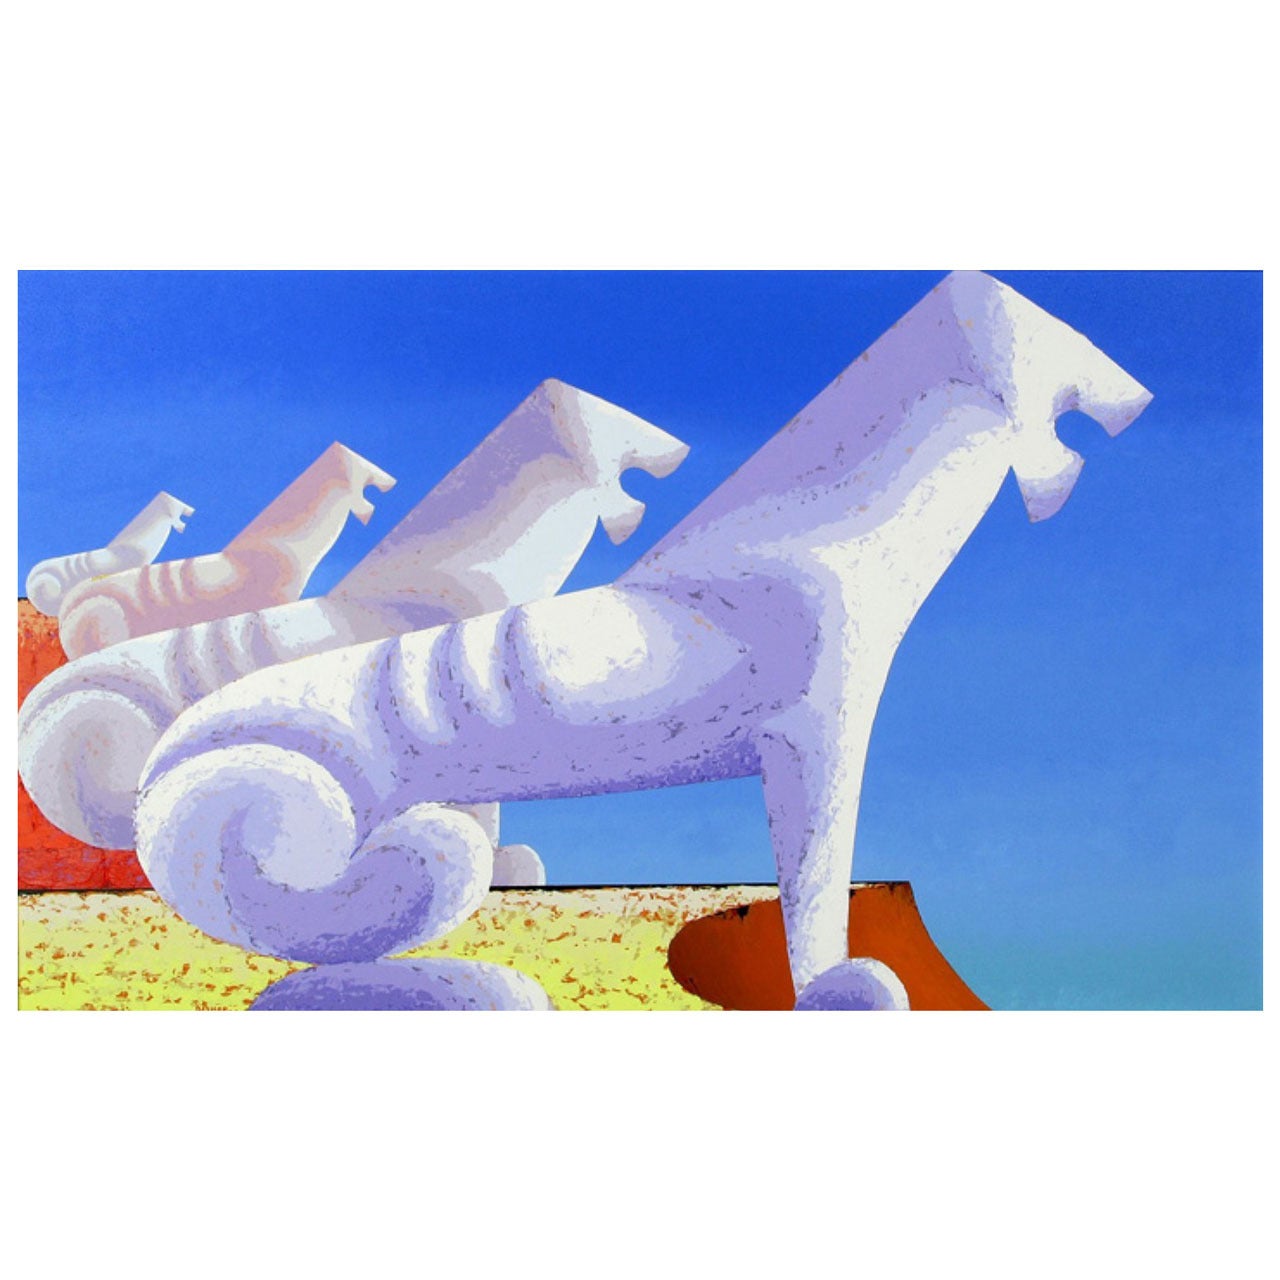 Large Painting of Sphinxes Against Blue Sky by Leon Bishop (1927-2006)